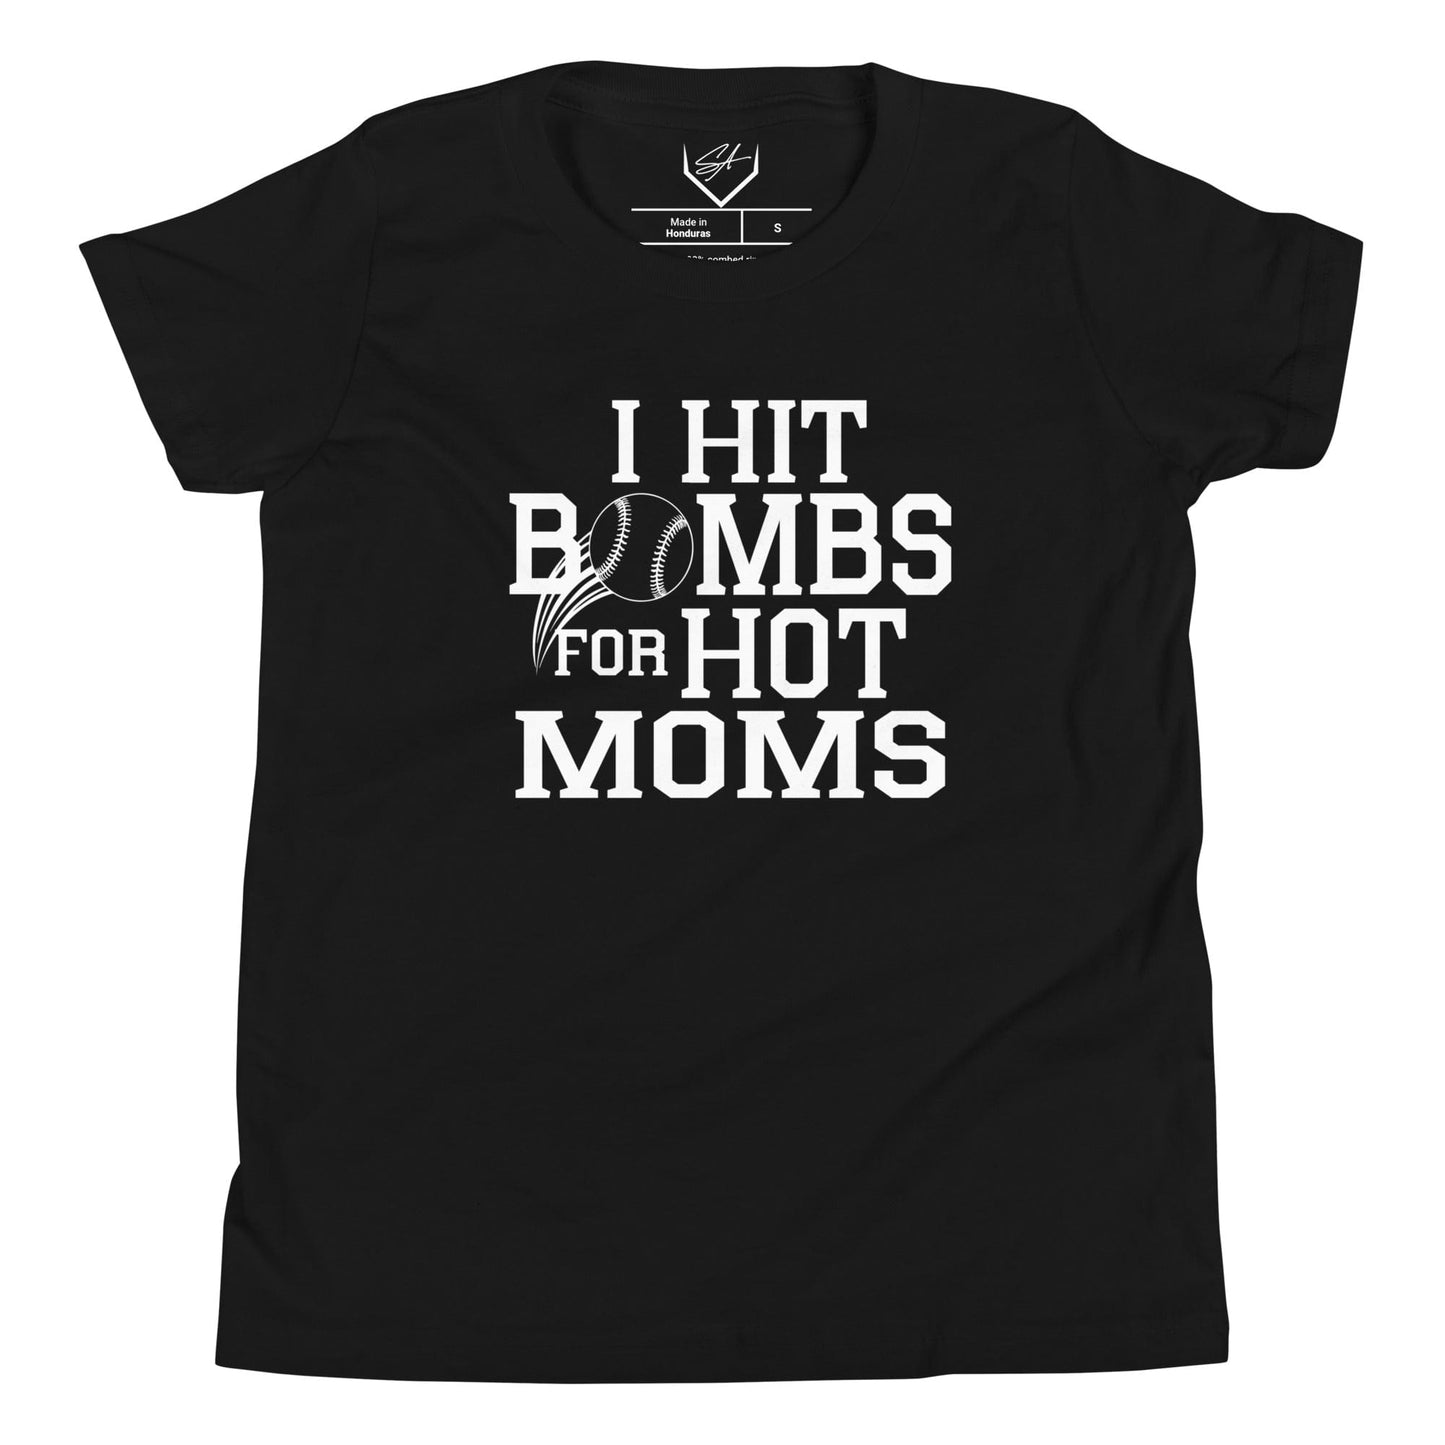 I Hit Bombs For Hot Moms - Youth Tee